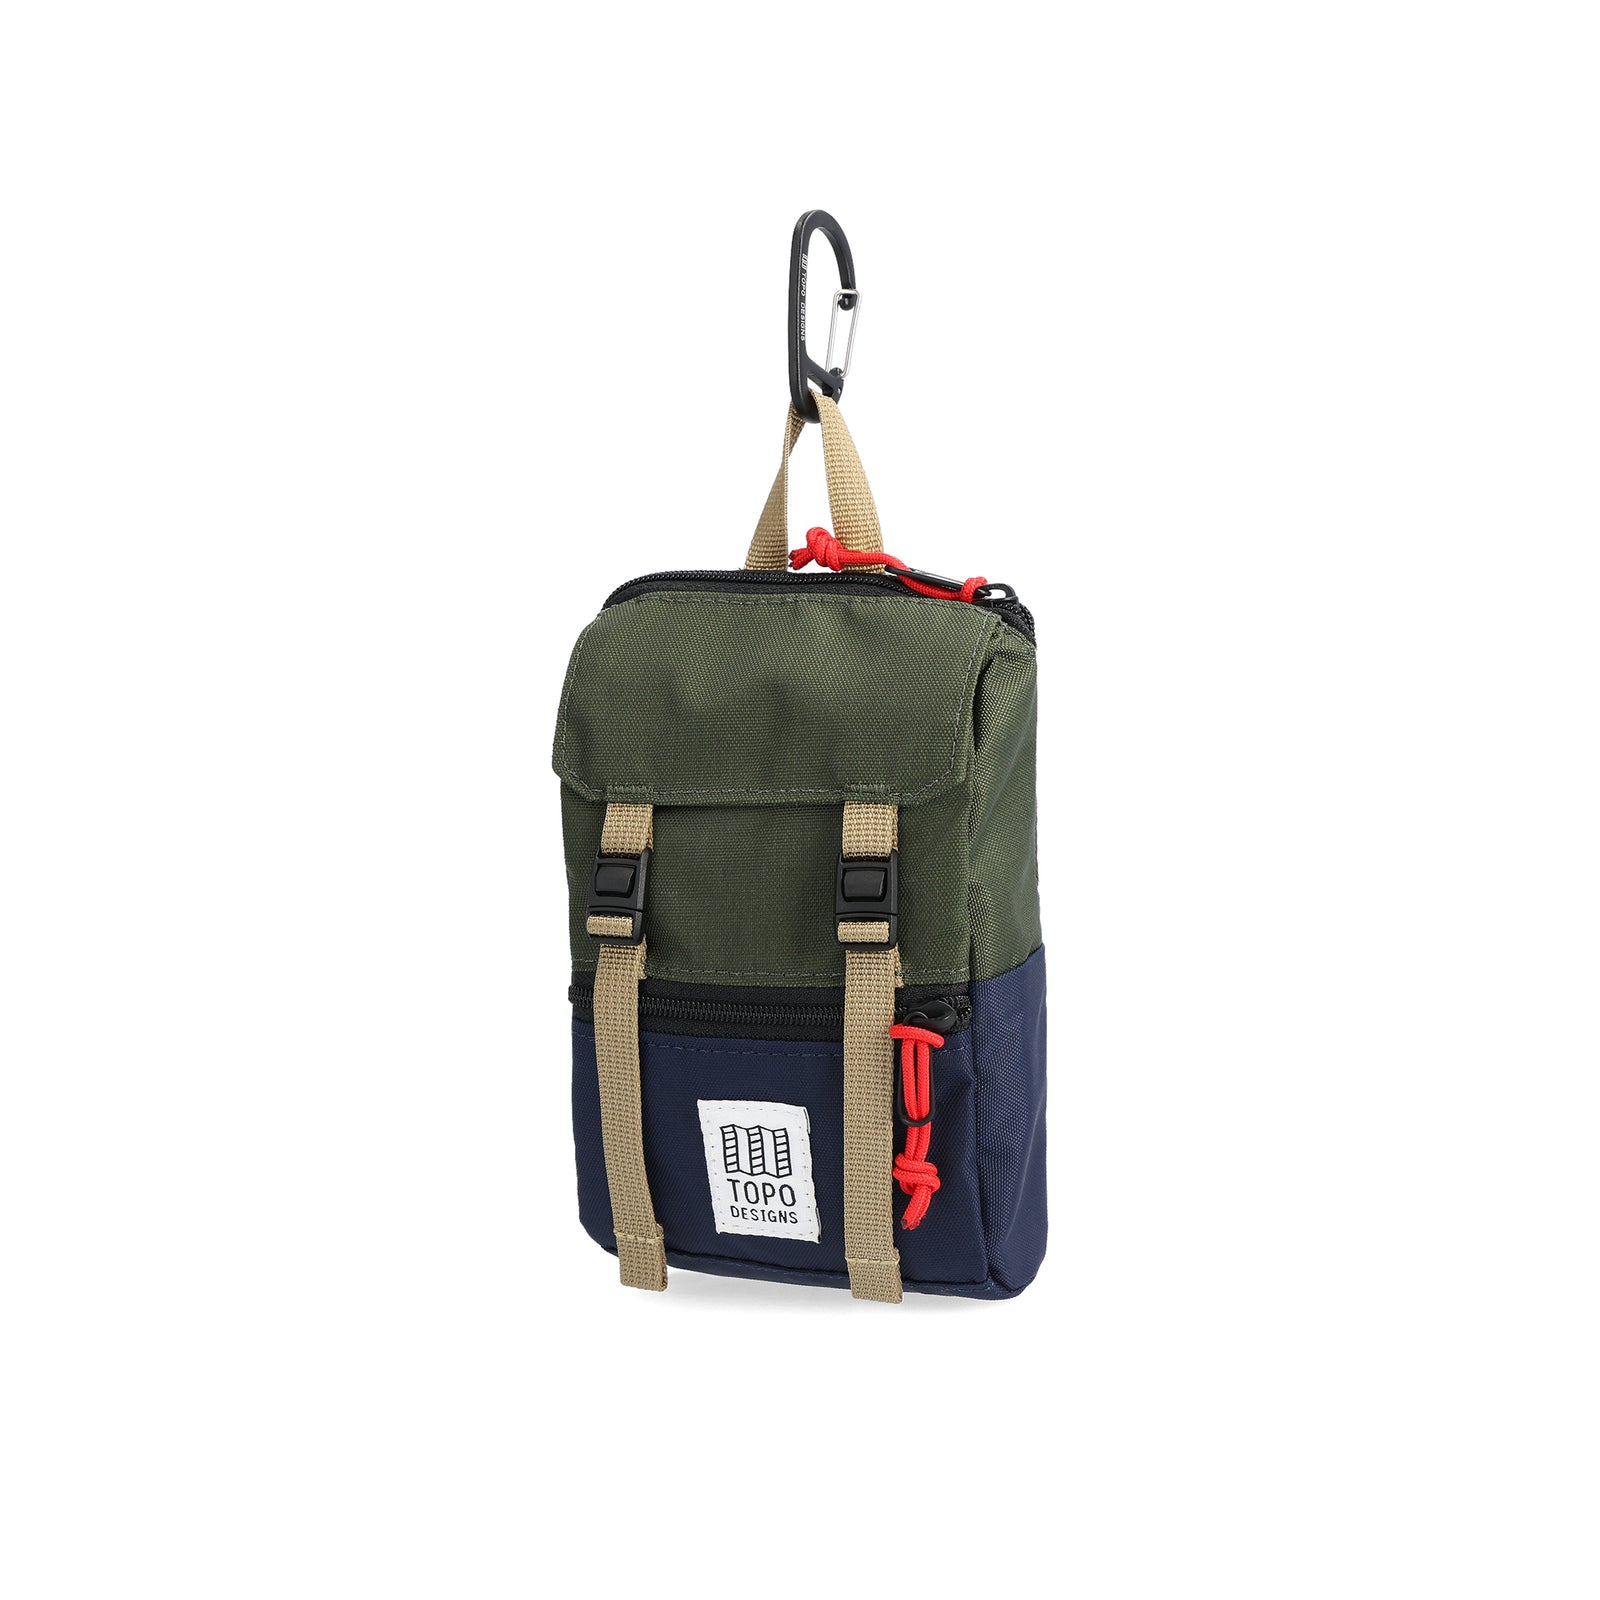 Front View of Topo Designs Rover Pack Micro in "Olive / Navy"